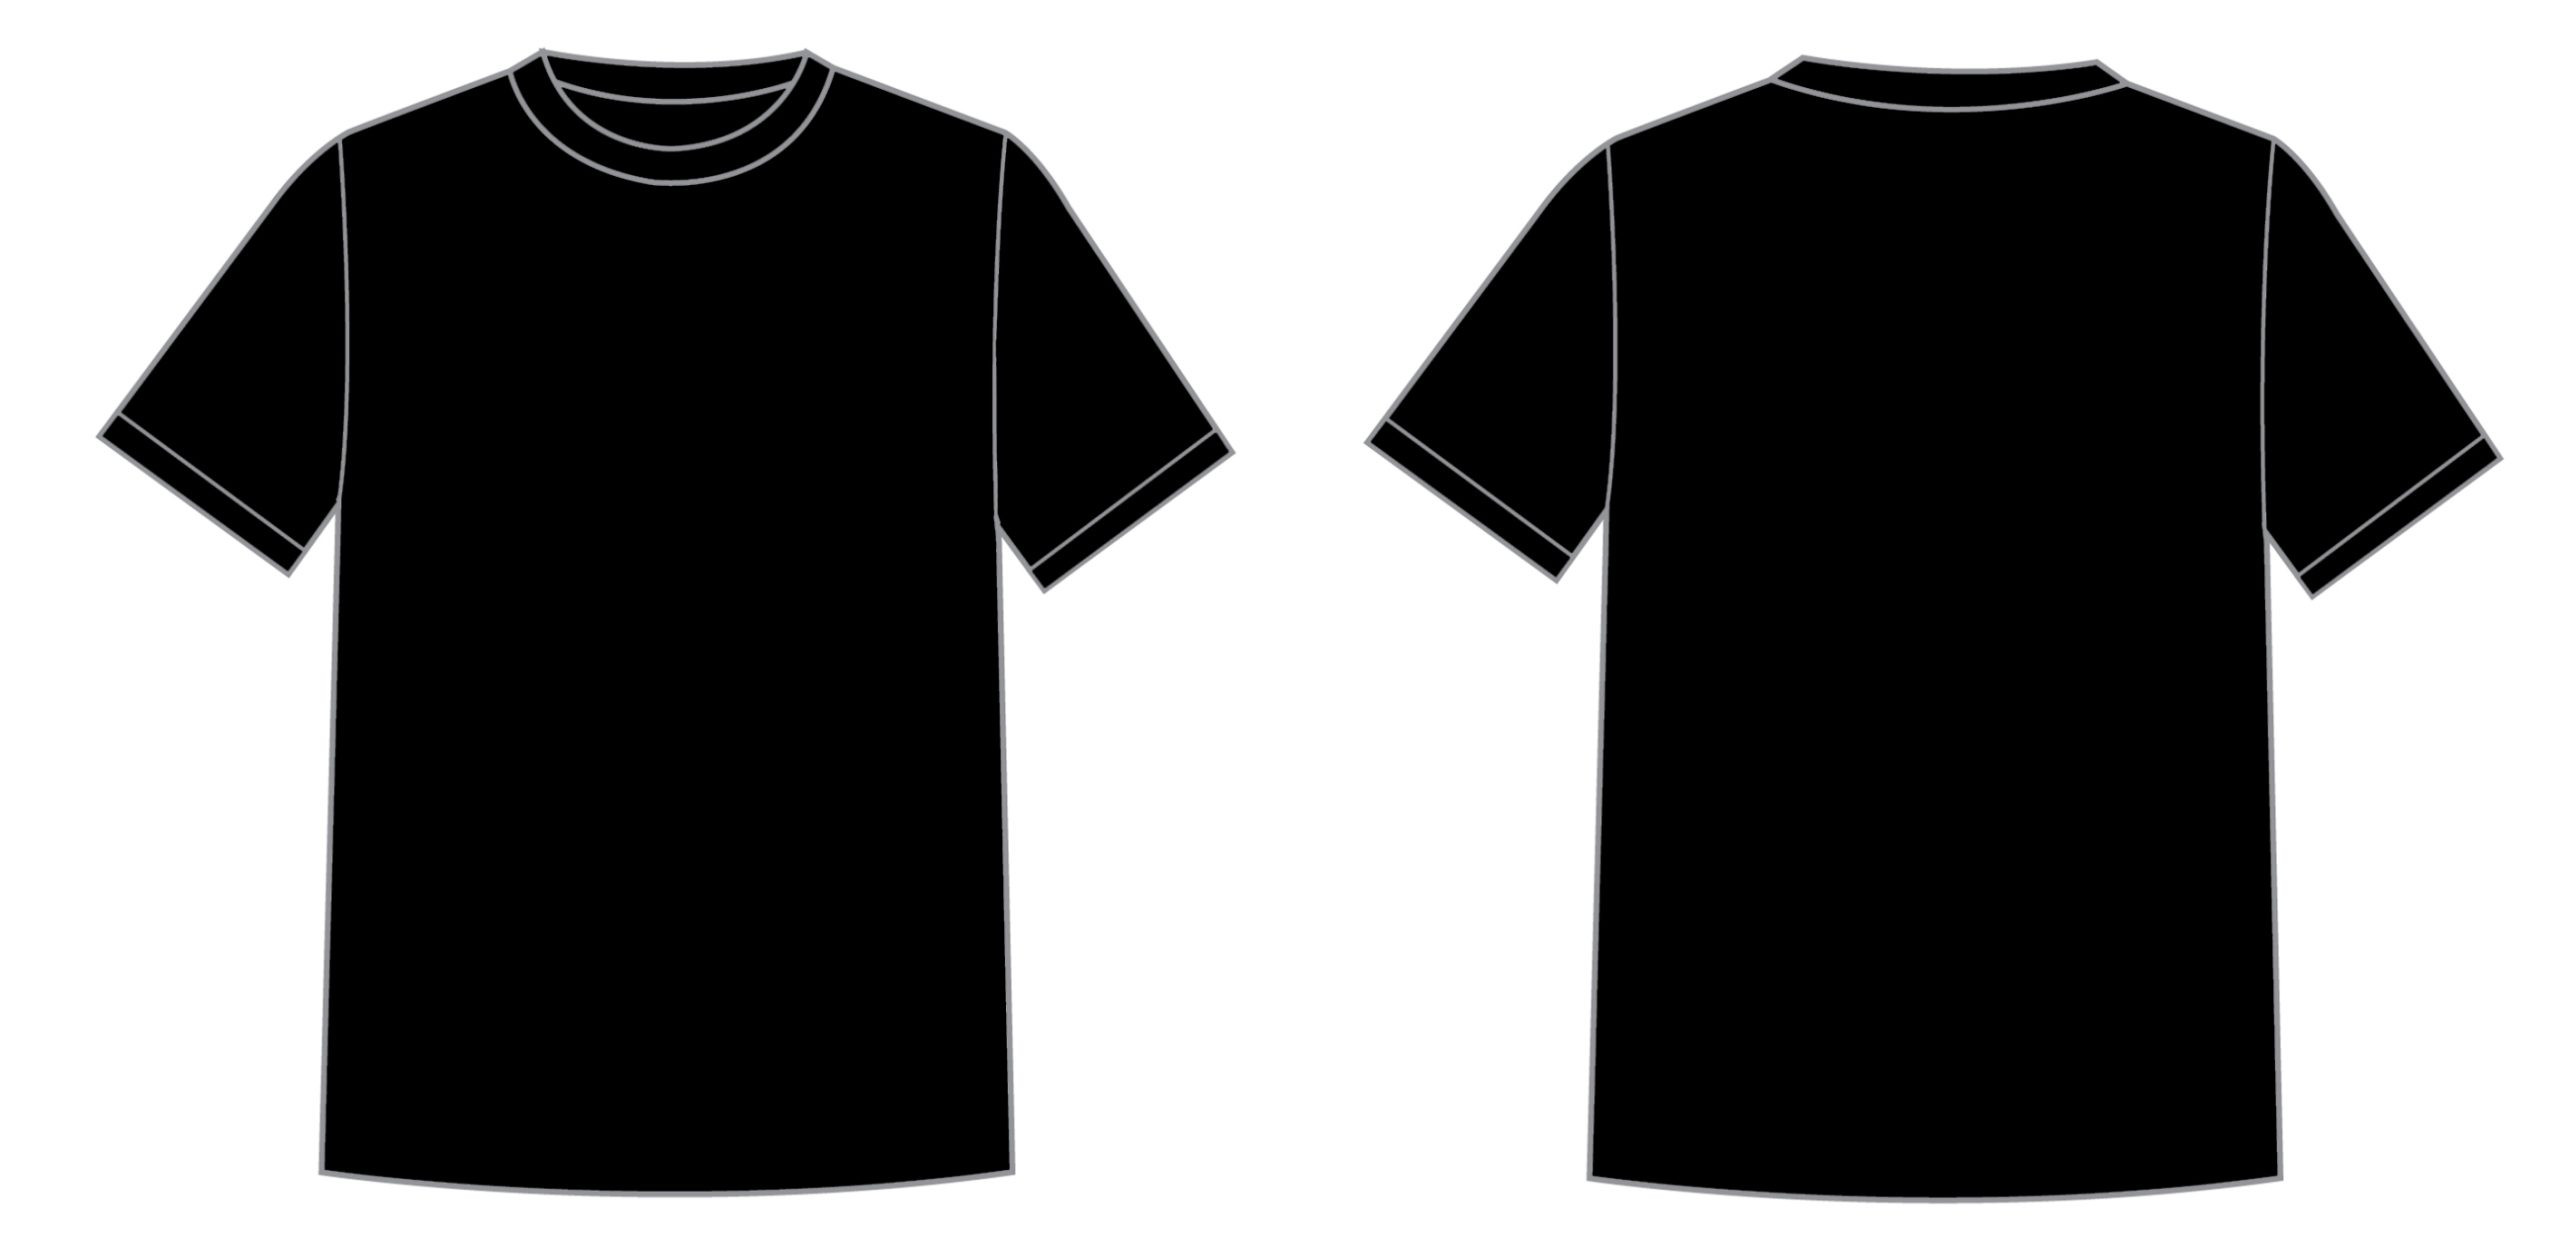 Blank T Shirt Template For Colouring - Clipart Best pertaining to Printable Blank Tshirt Template